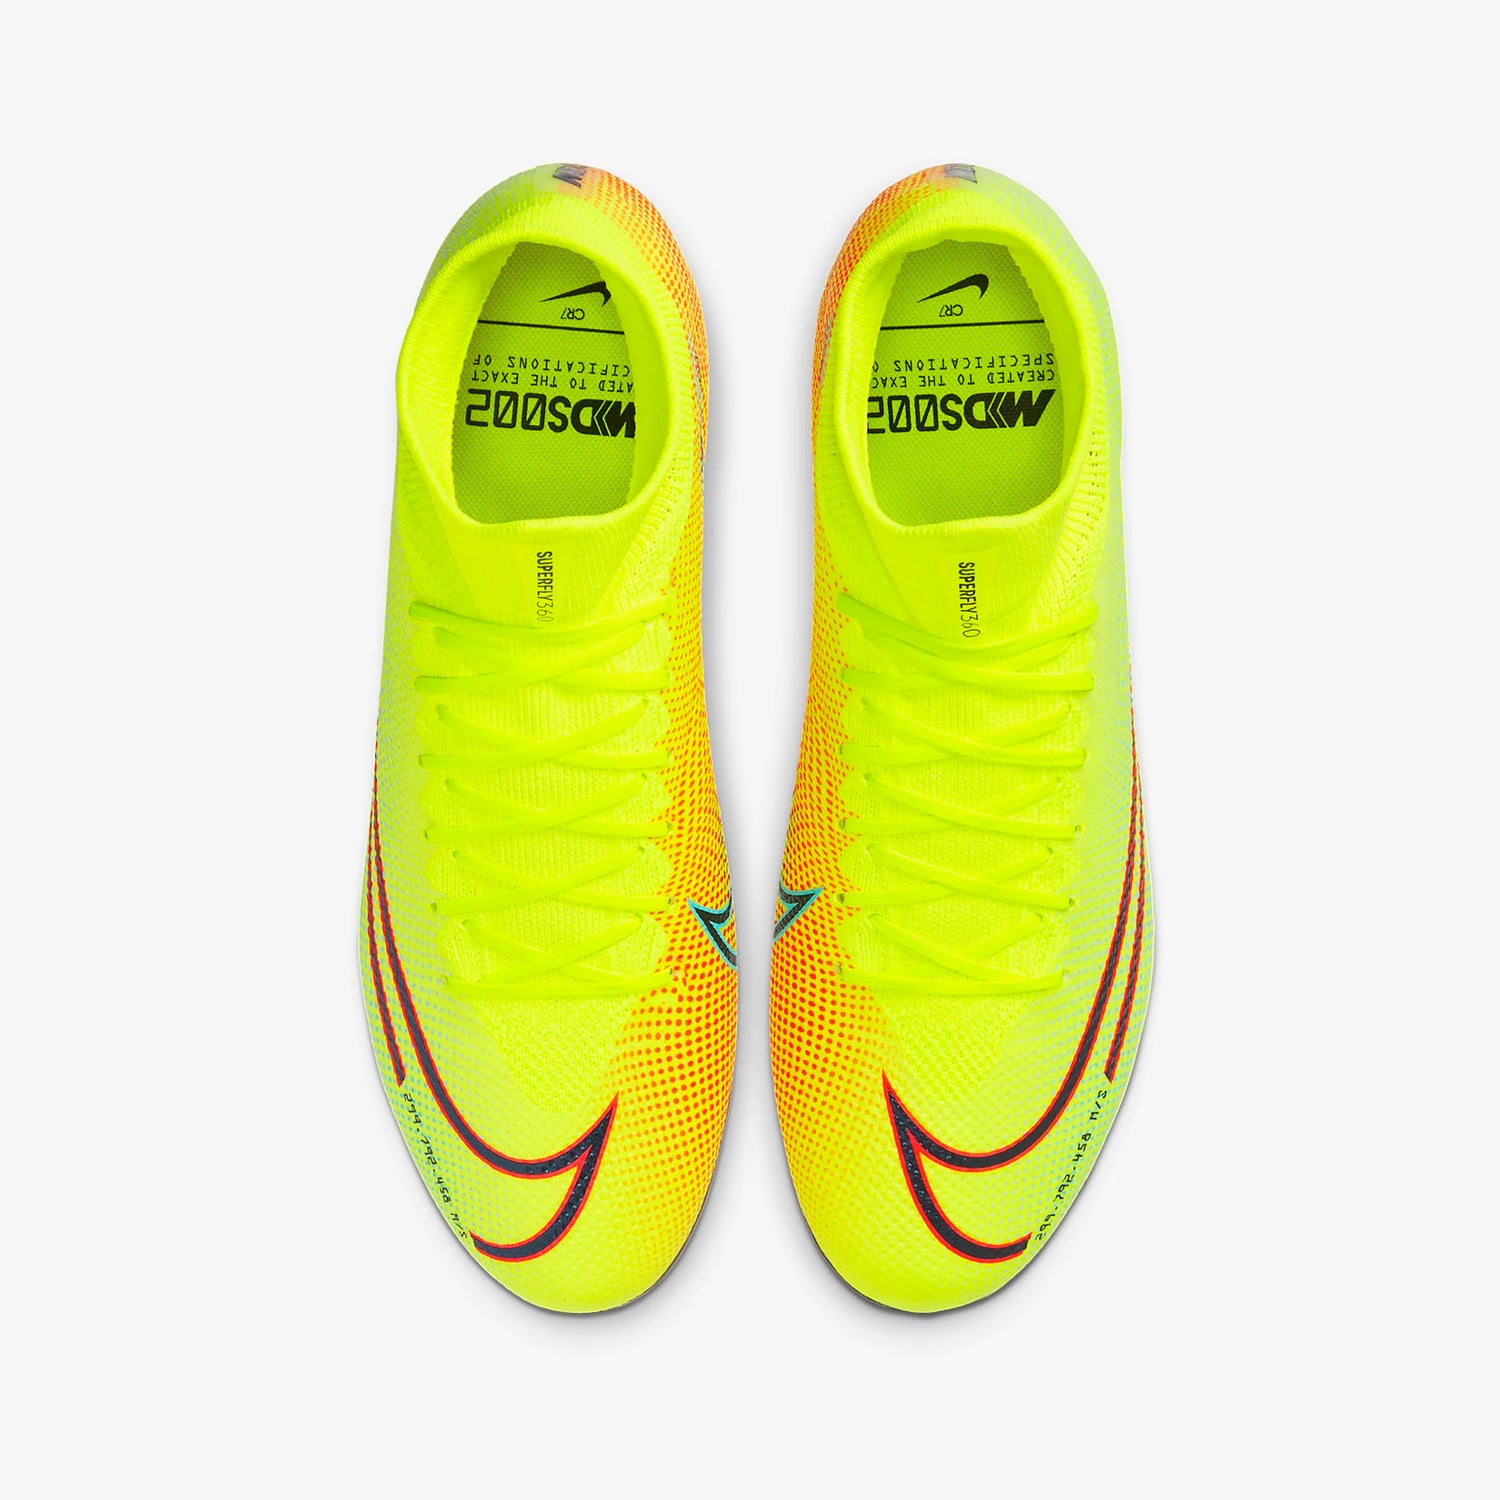 Mercurial Superfly 7 Pro FG Firm-Ground Soccer